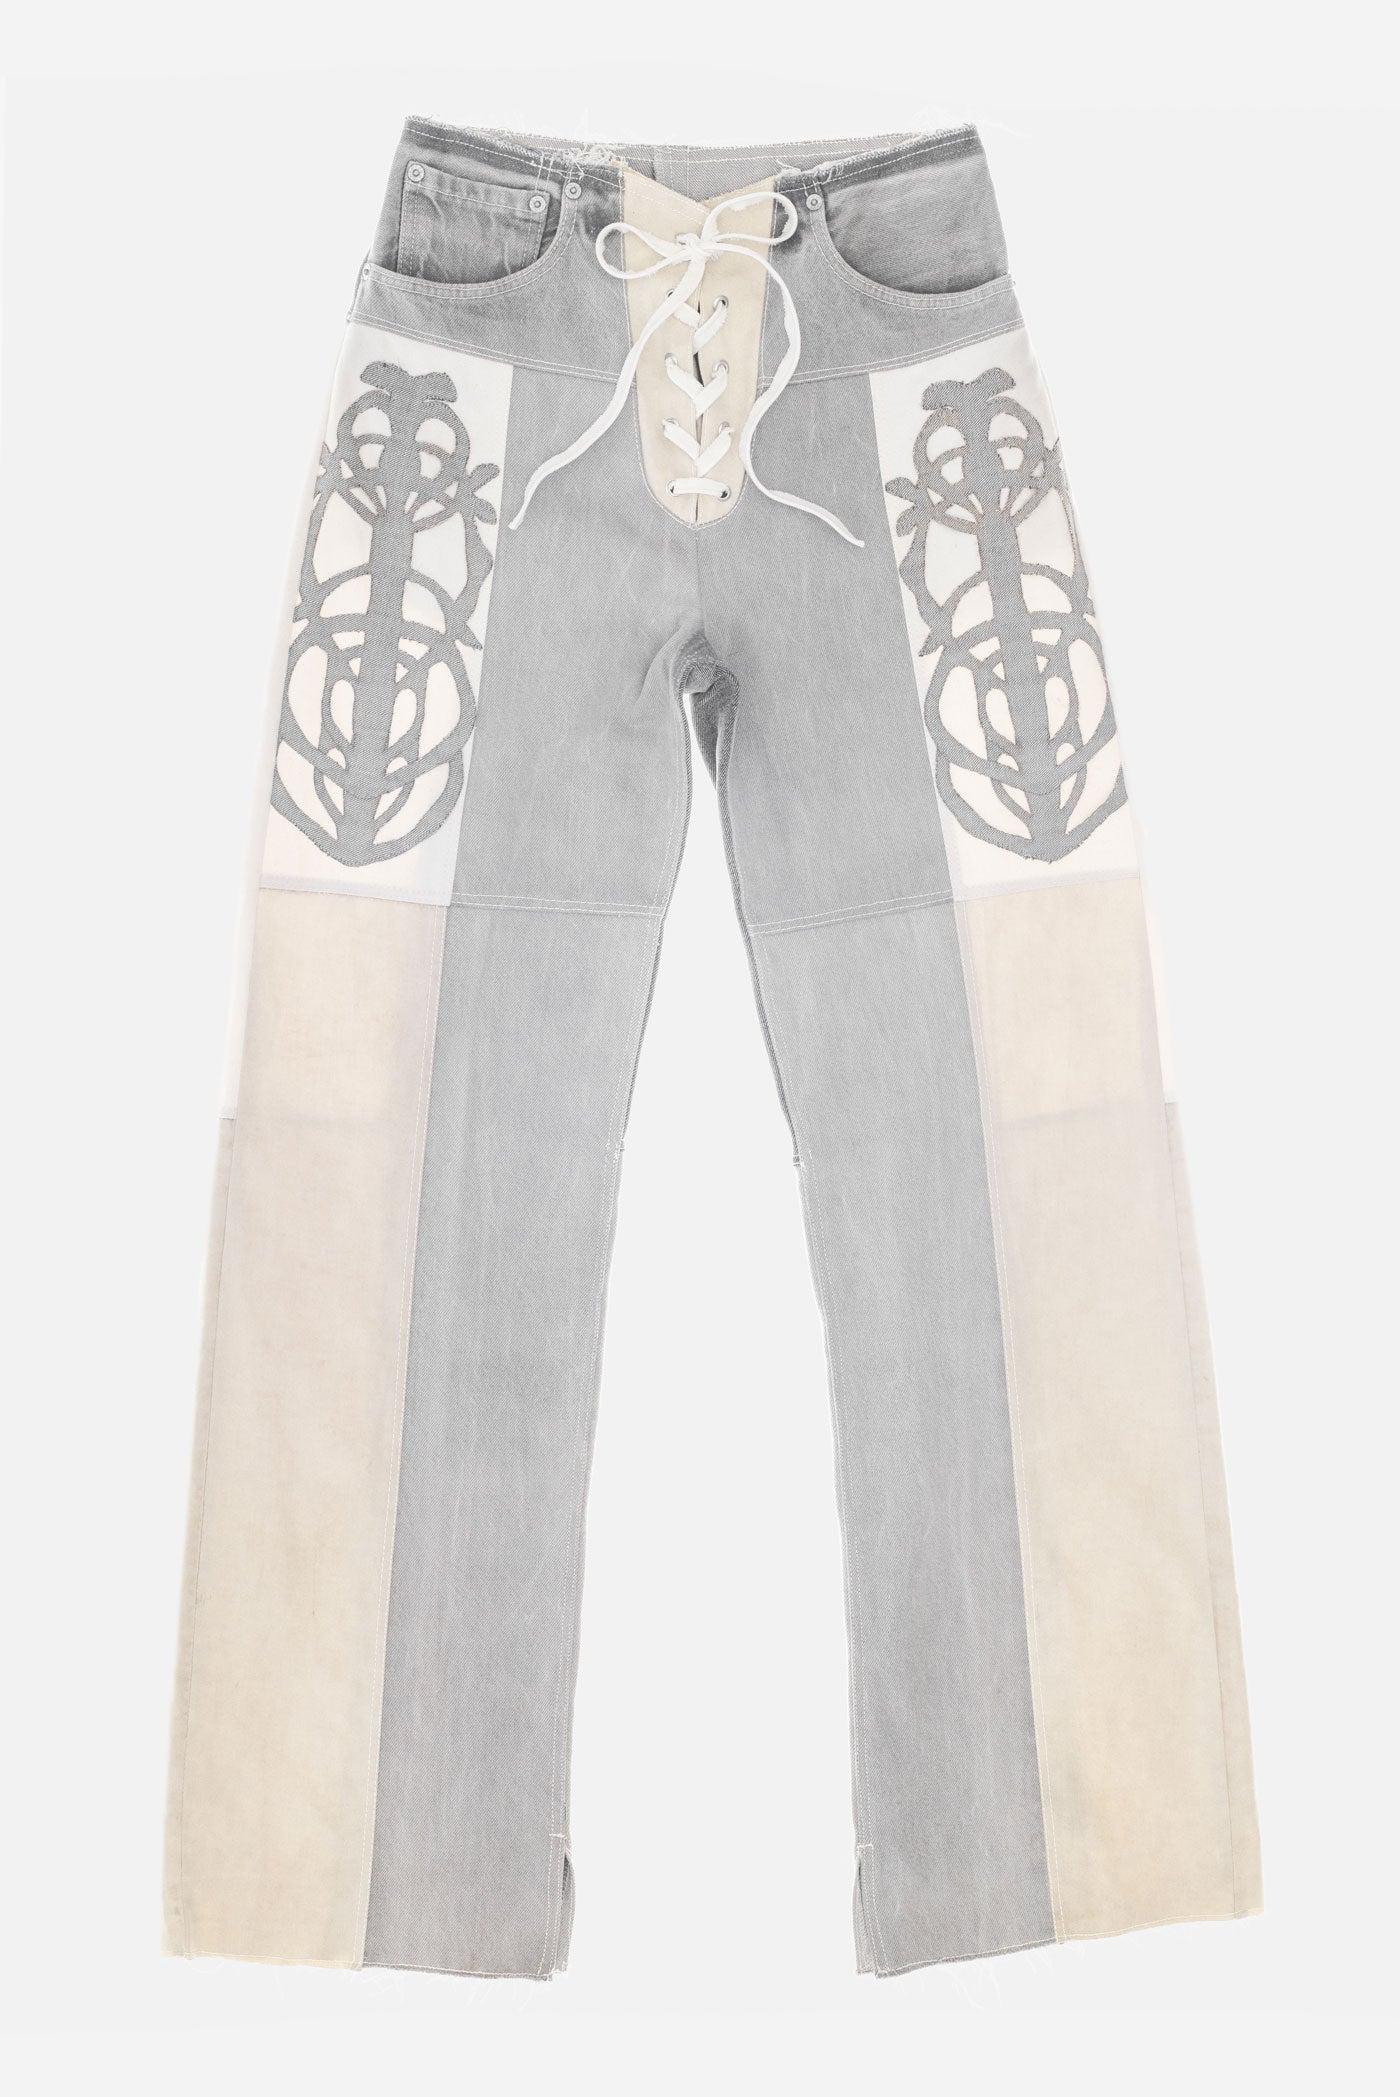 TRISTAN KEY AND LOCK TROUSERS